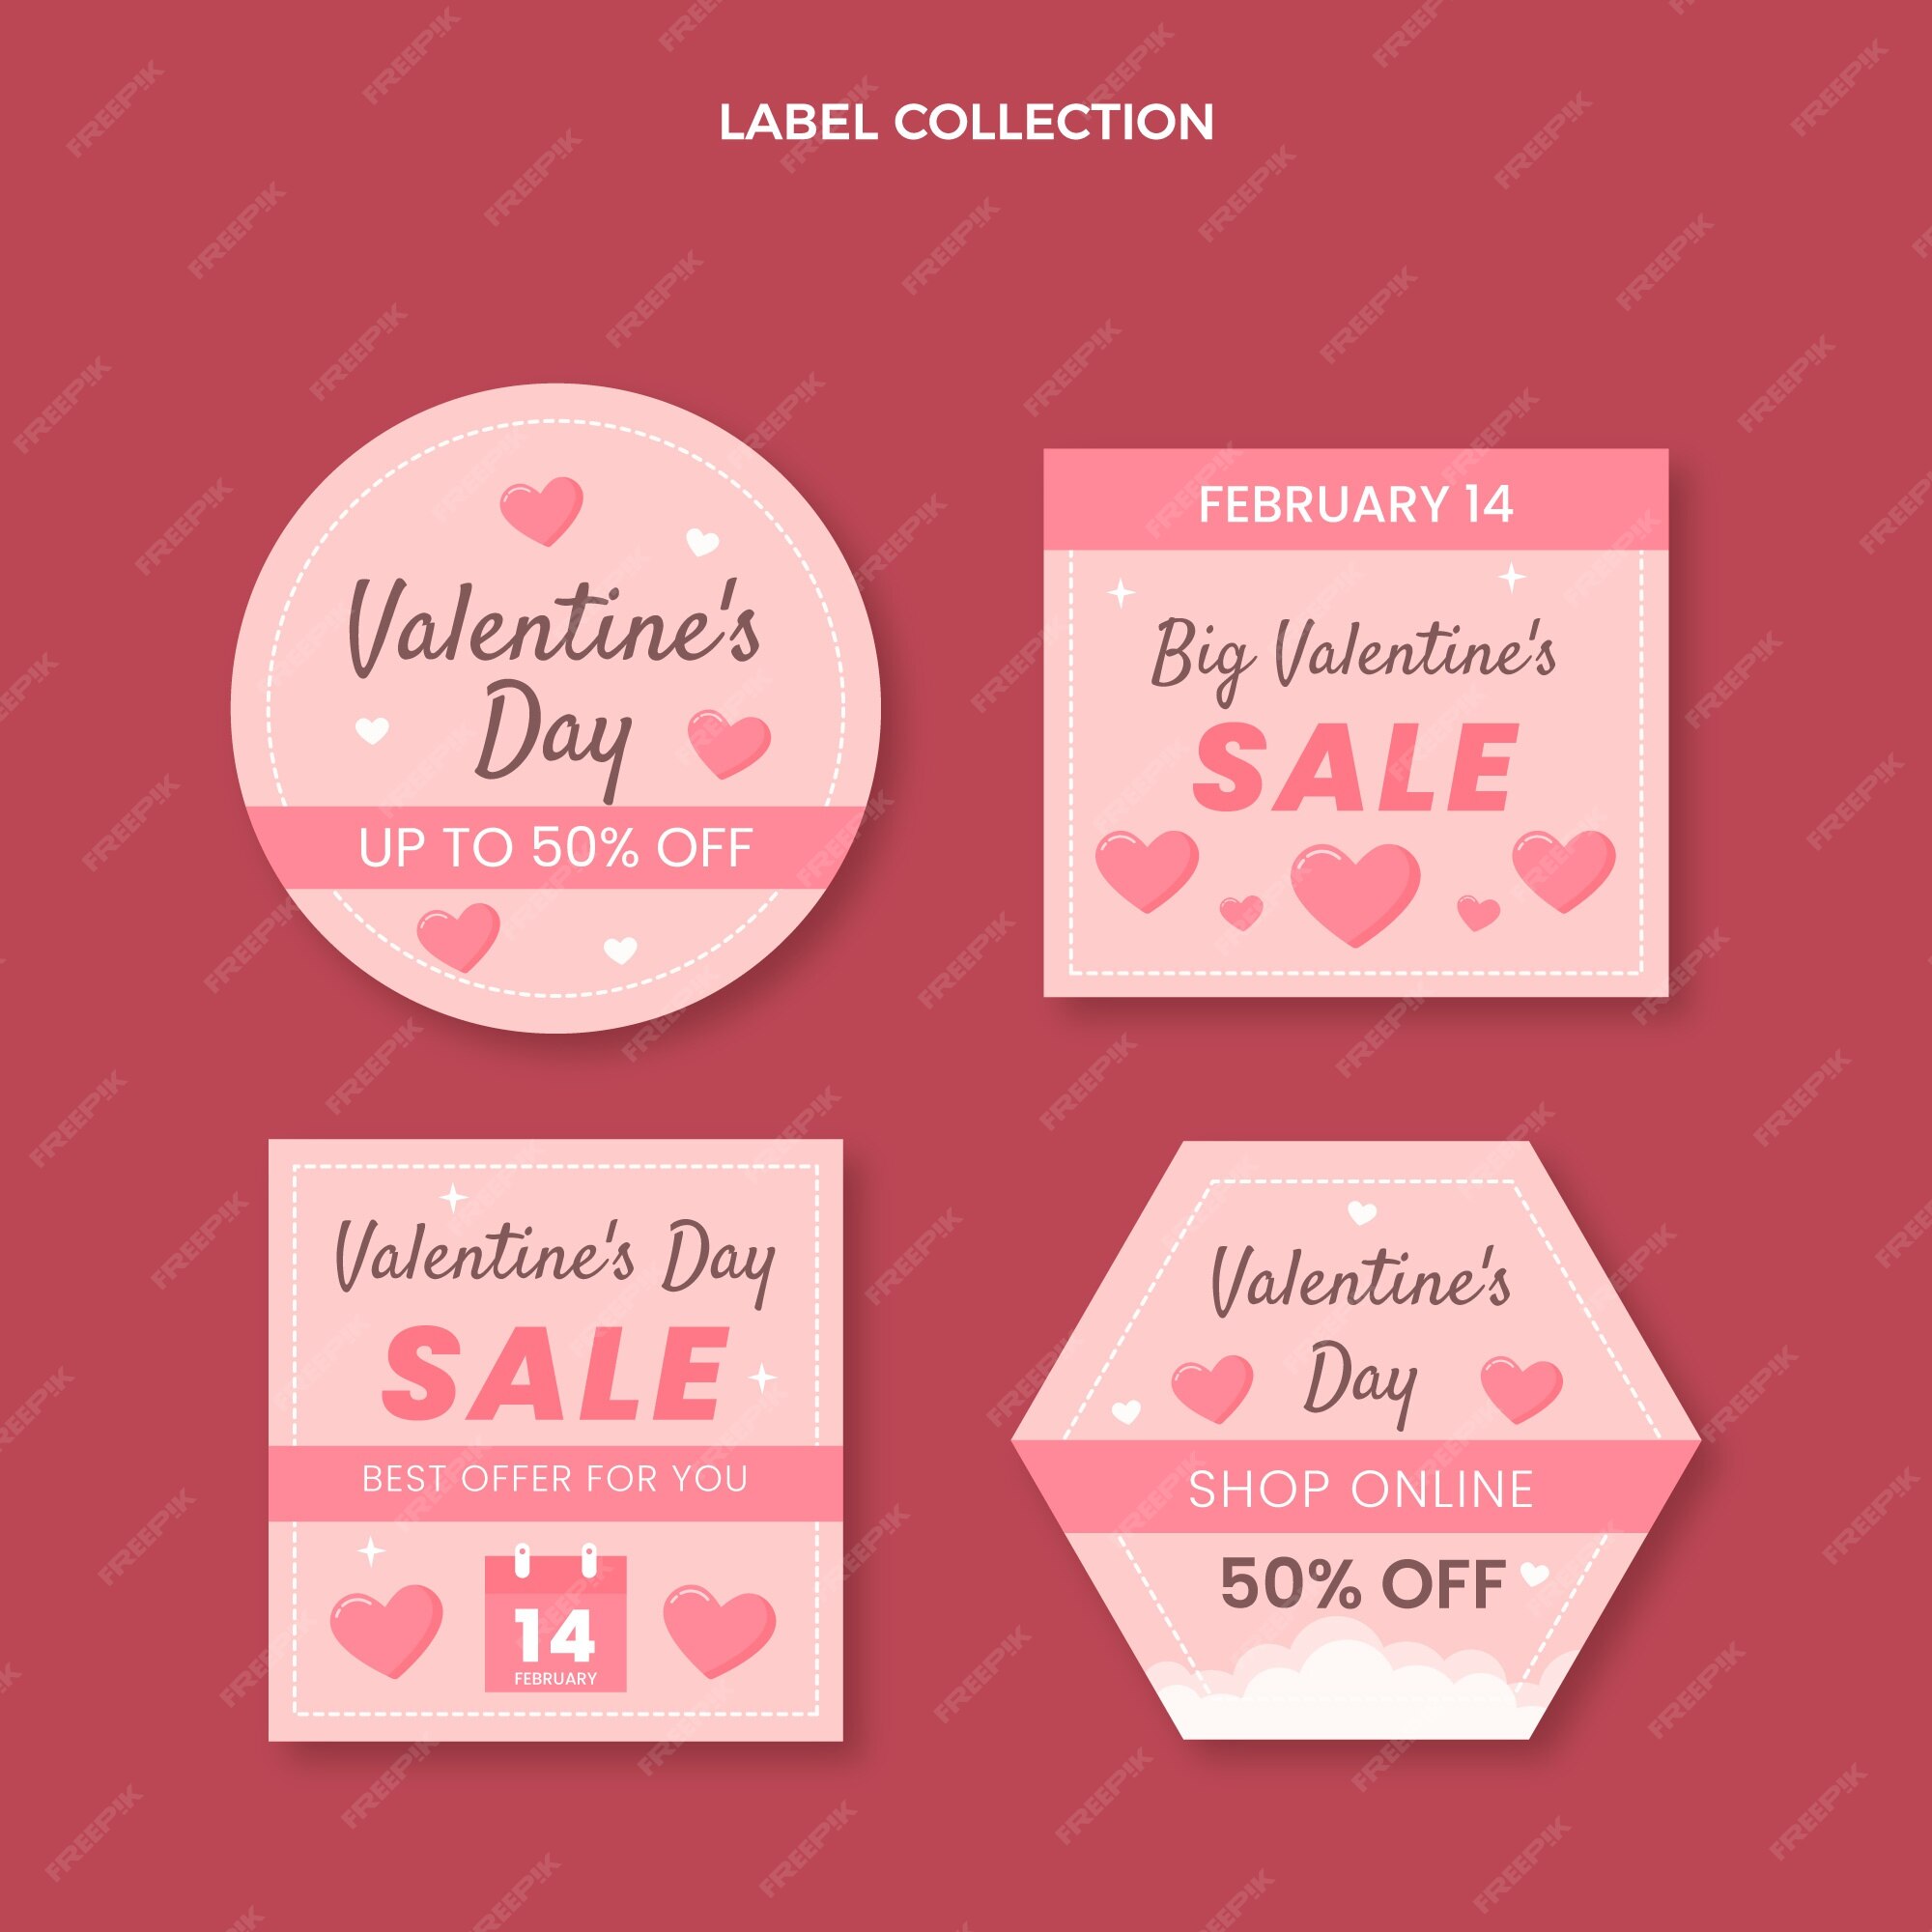 free-vector-flat-valentine-s-day-labels-collection